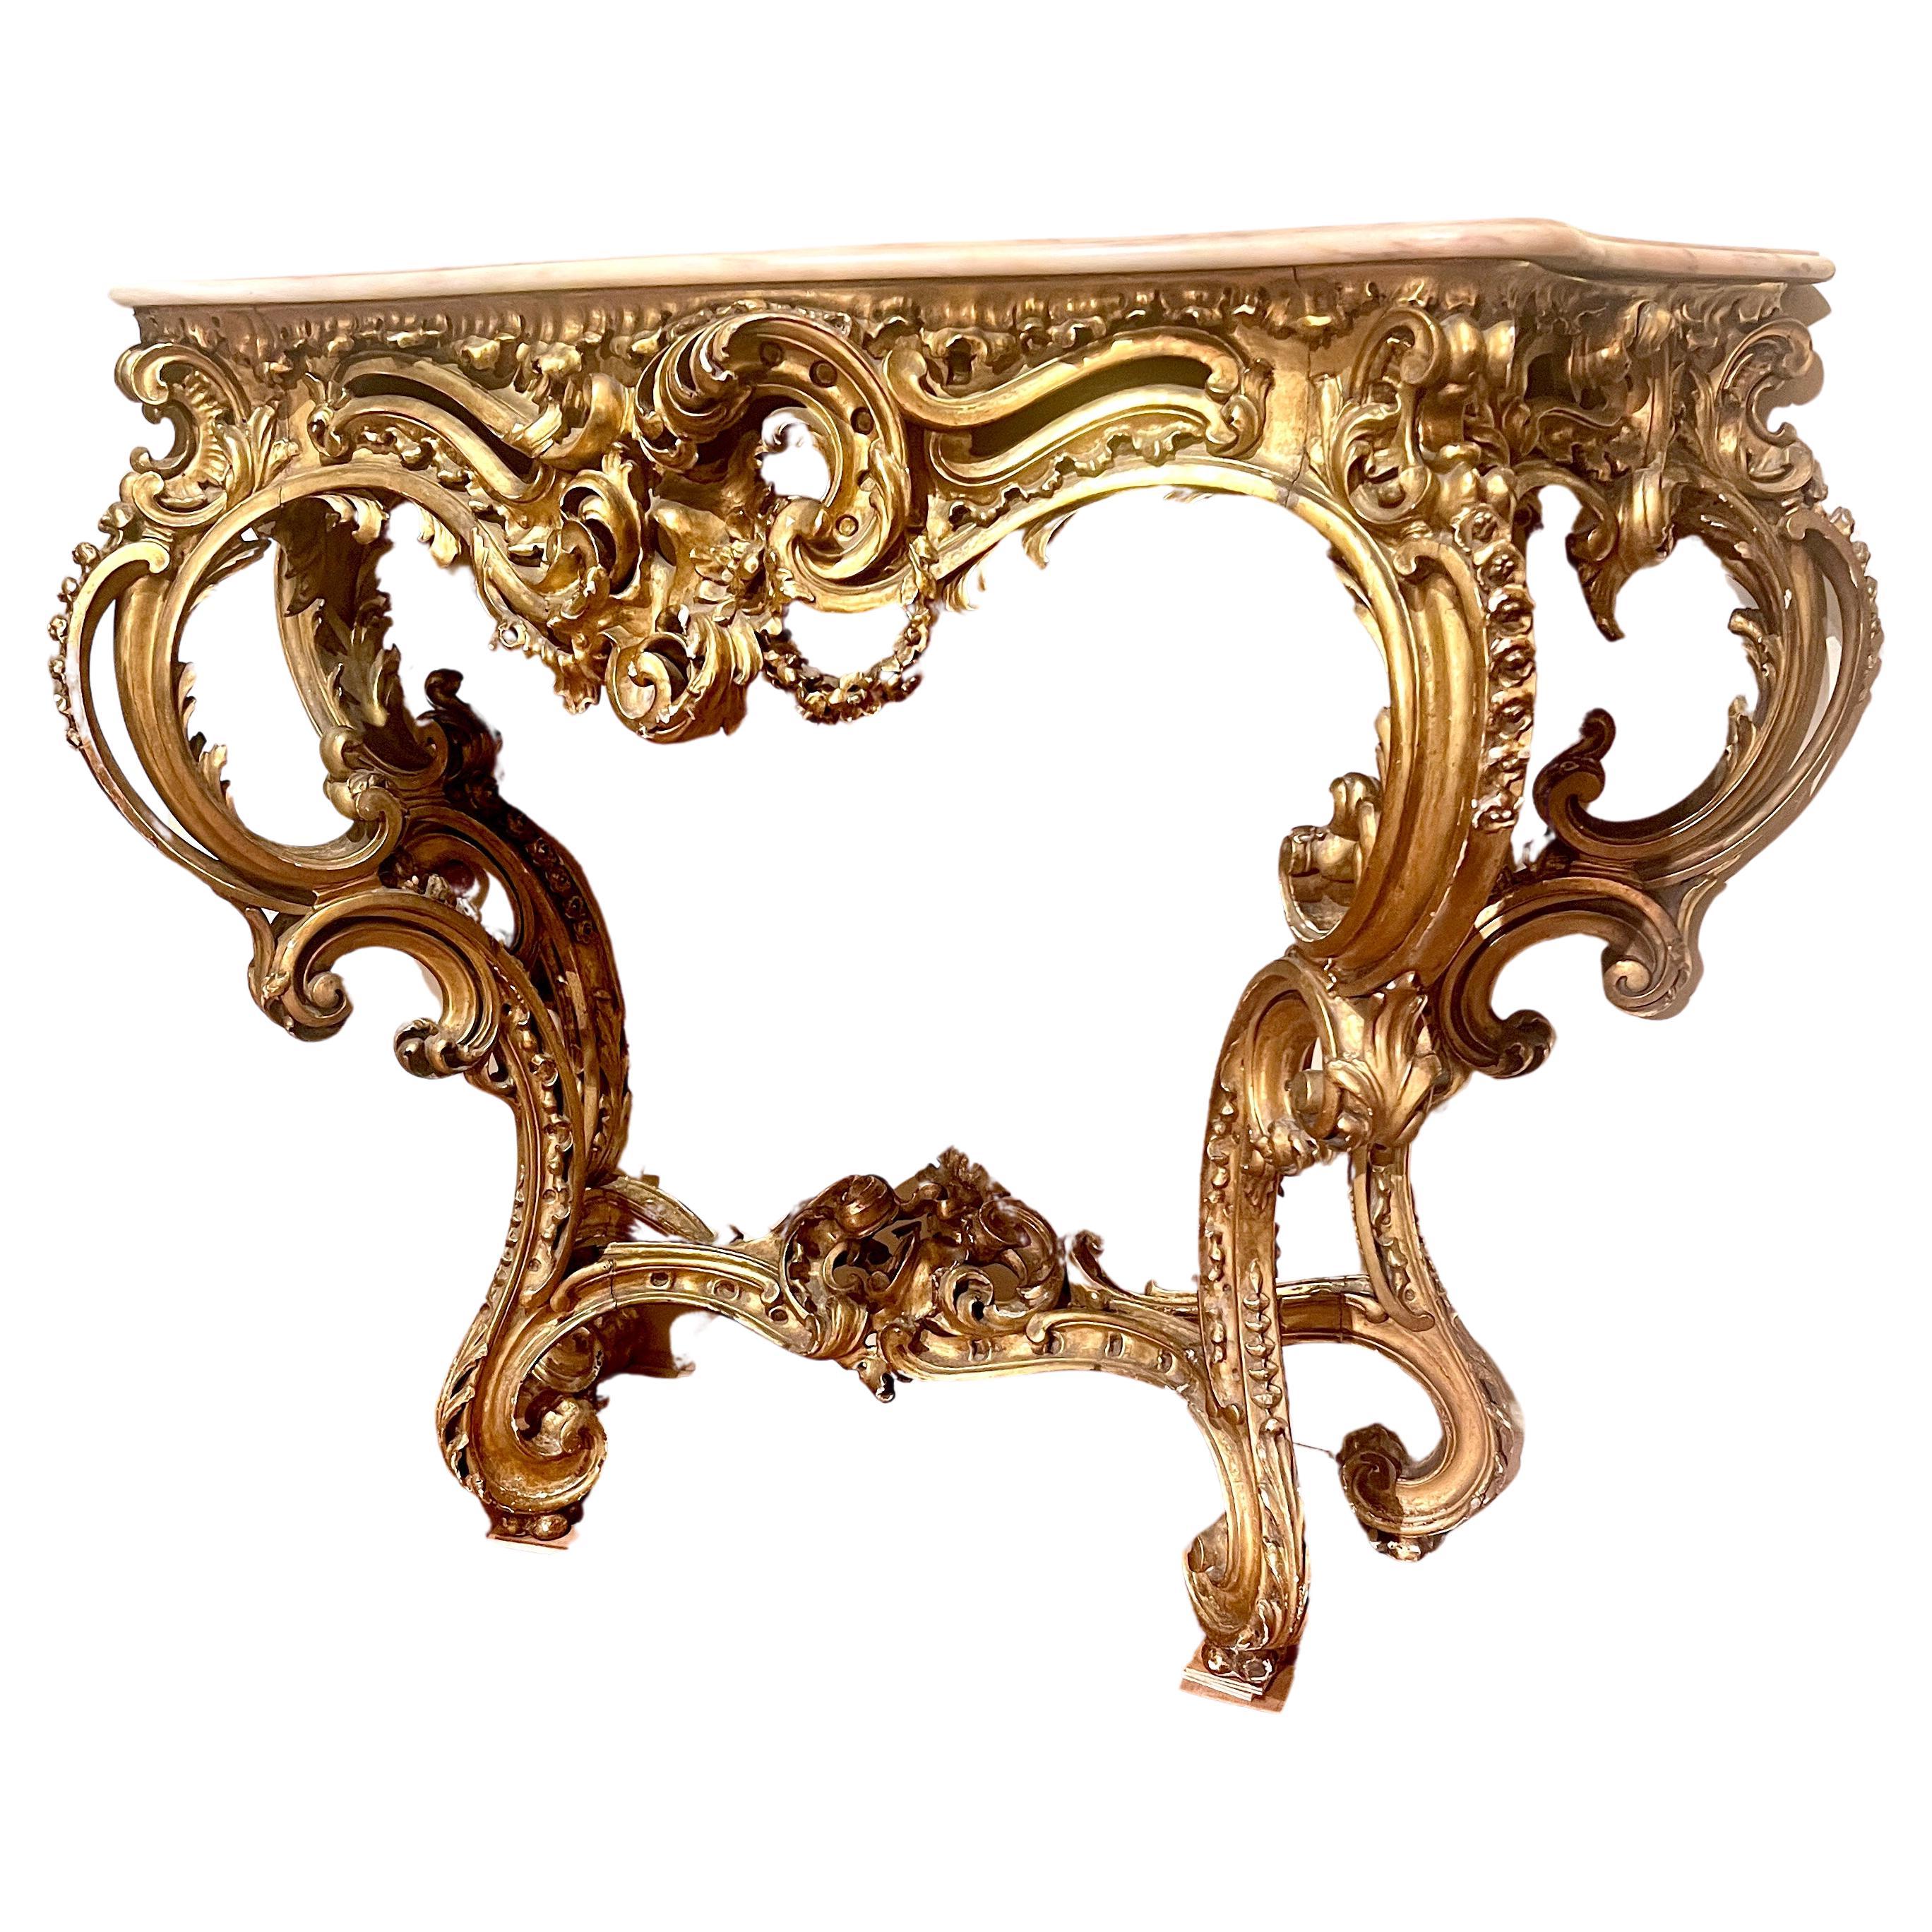 Pair Fine Antique 19th Century Continental Gold Leaf and Marble Top Console Tables.